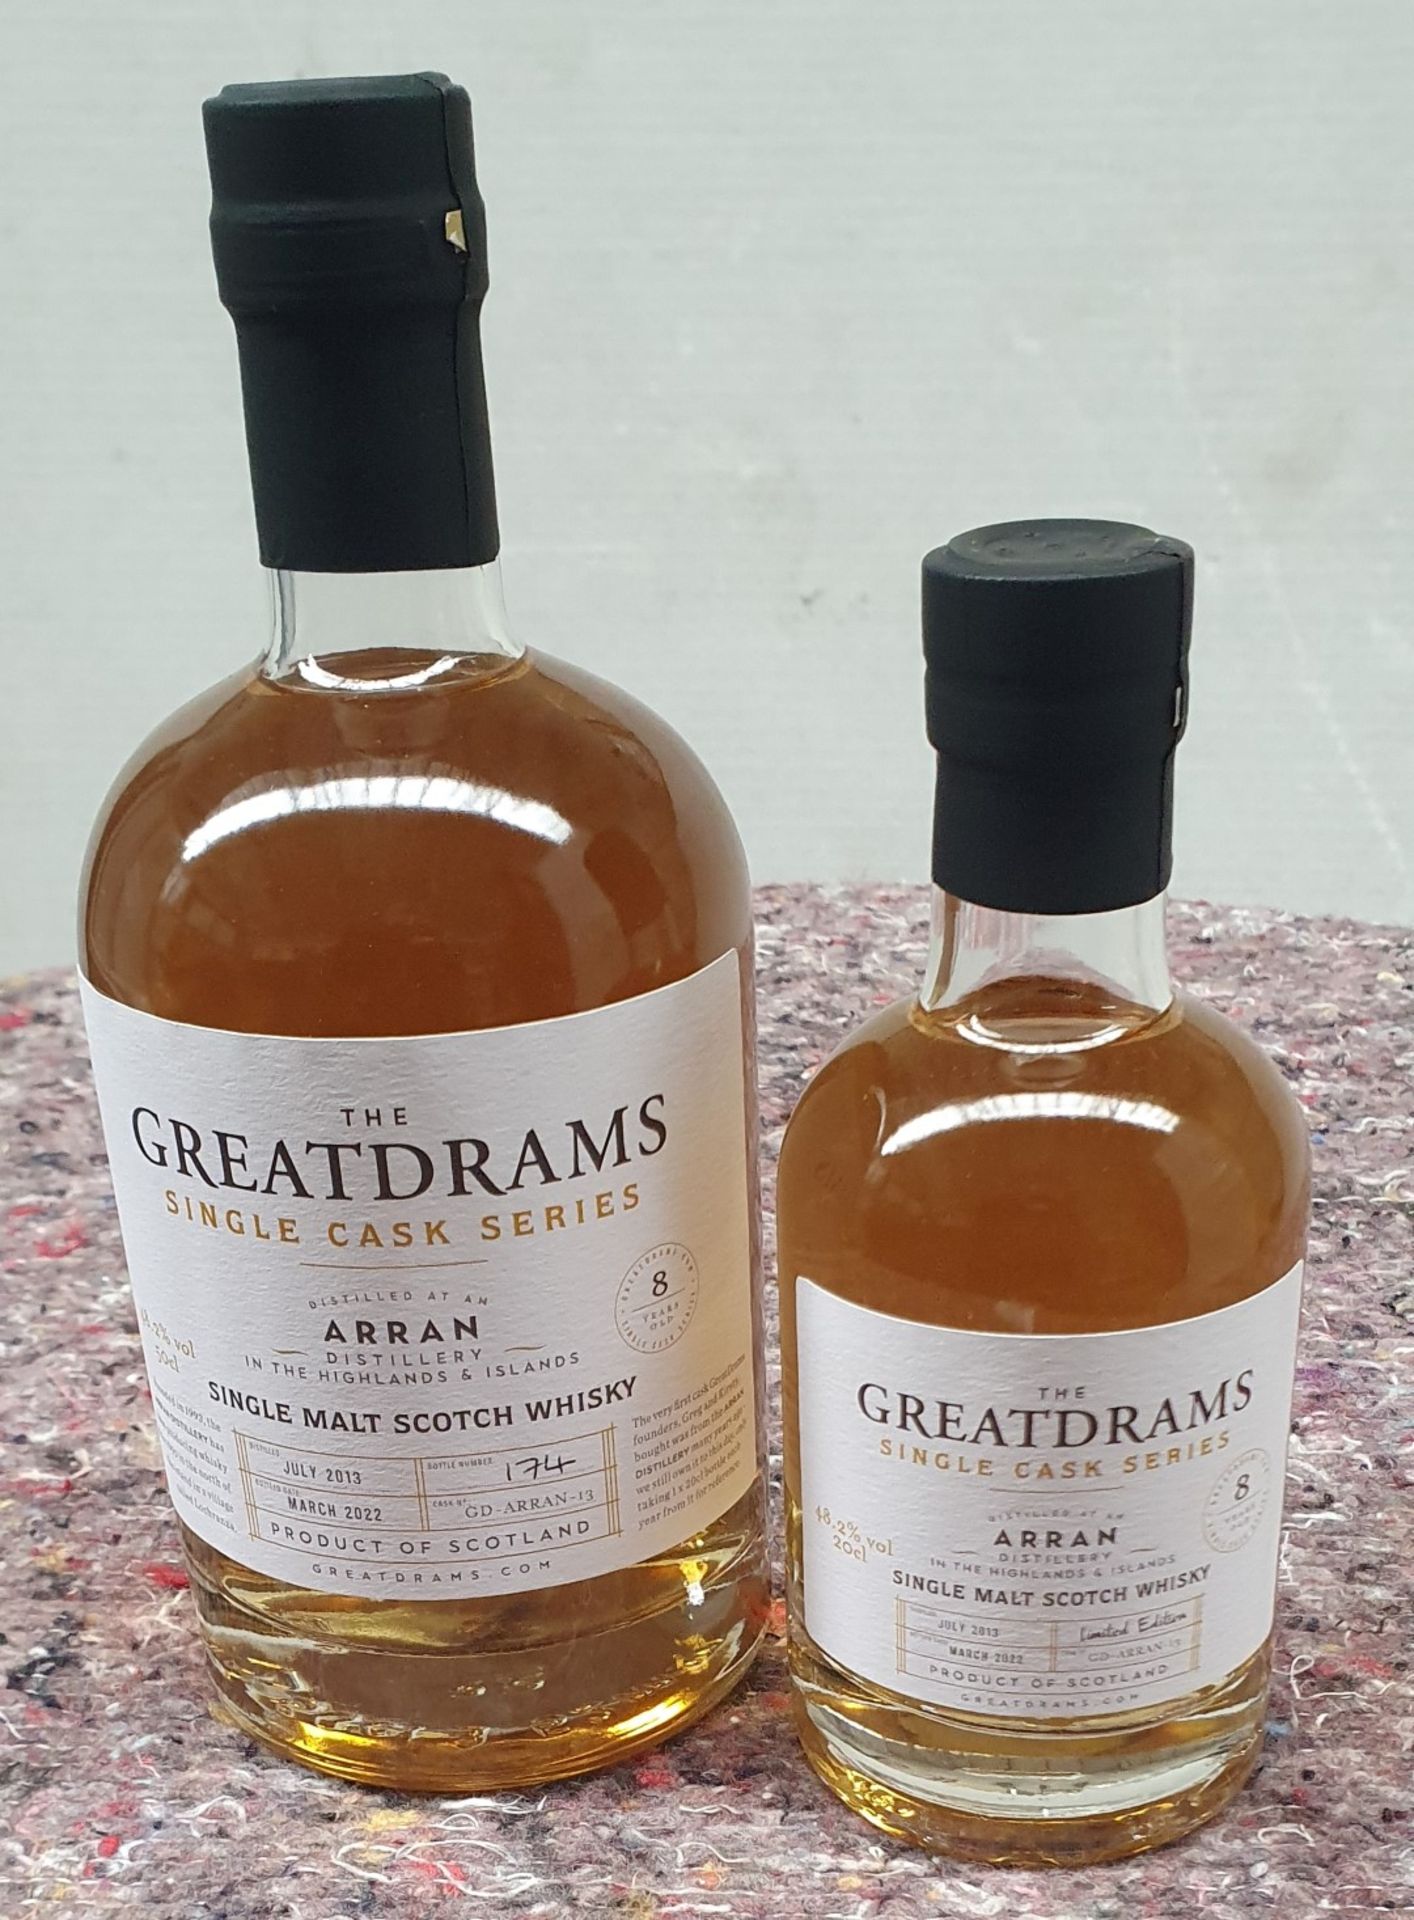 2 x Bottles of Greatdrams Single Cask Series Arran Single Malt Scotch Whisky - Includes 20cl and